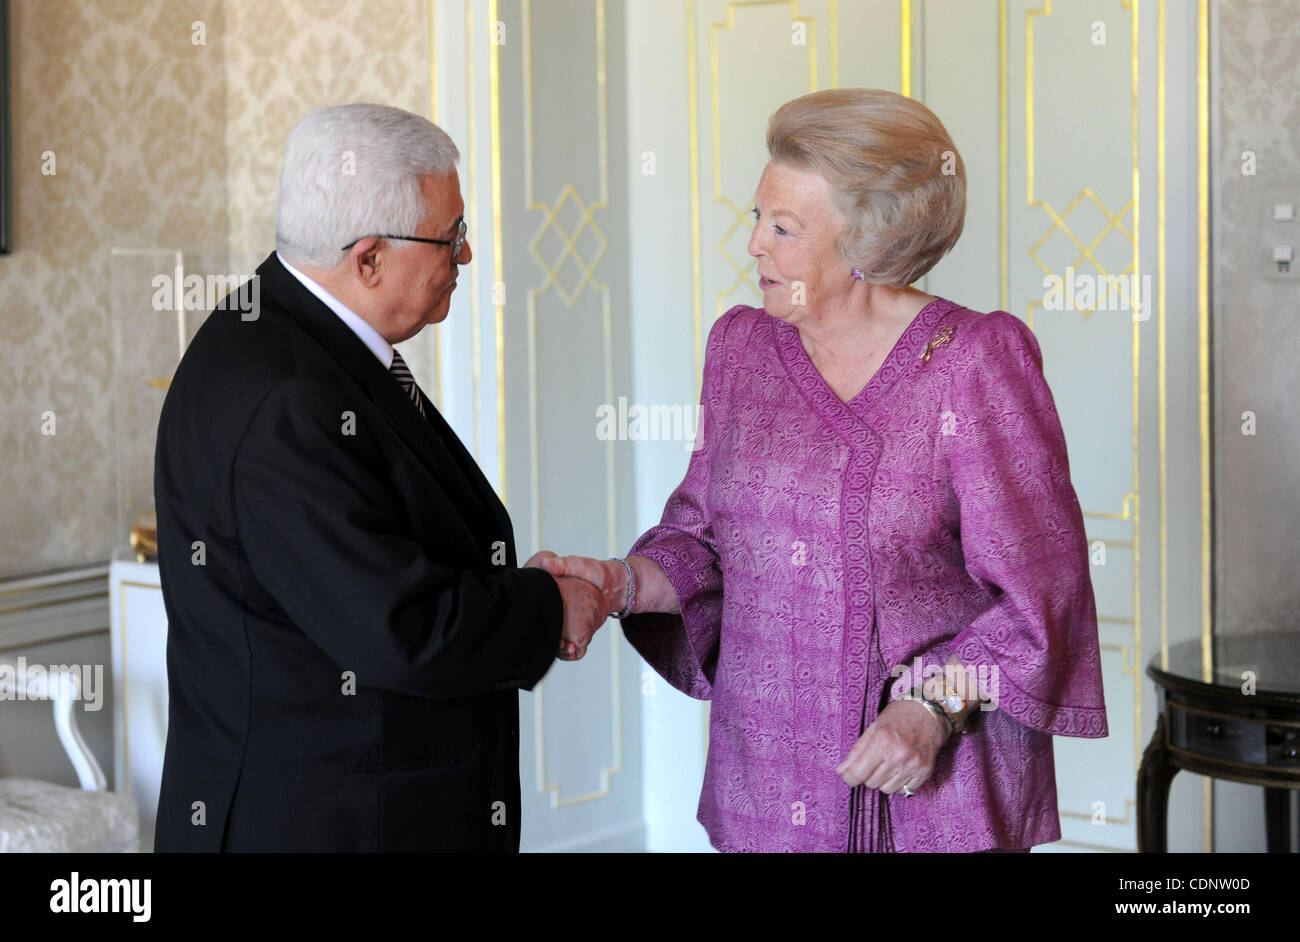 Palestinian president Mahmoud abbas (Abu Mazen) meets with the Queen of Netherlands on Jun 29,2011. Photo by Thaer Ganaim Stock Photo